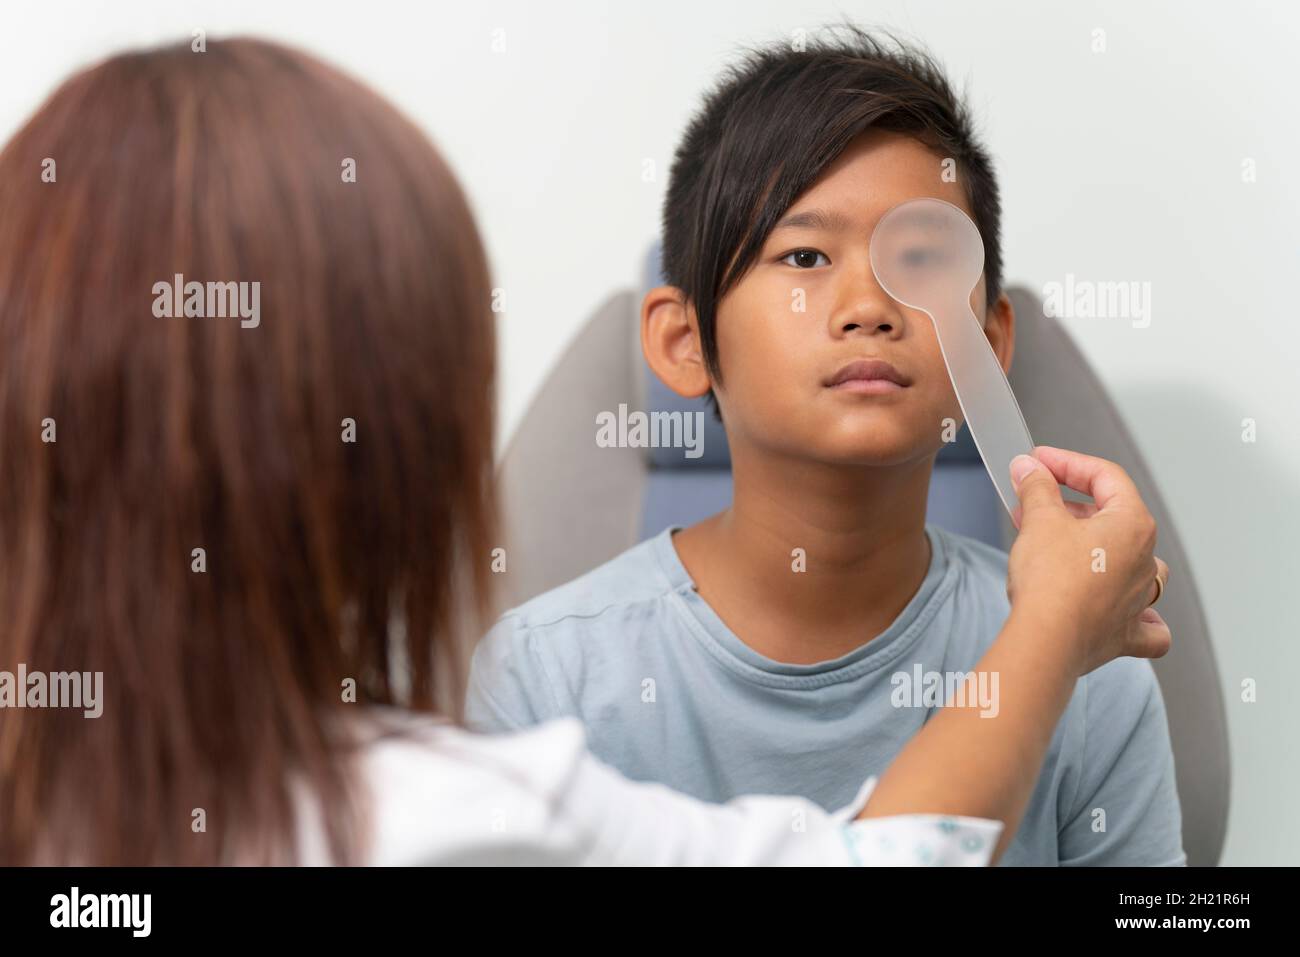 Asian boy in a consultation of an ophthalmologist woman Stock Photo